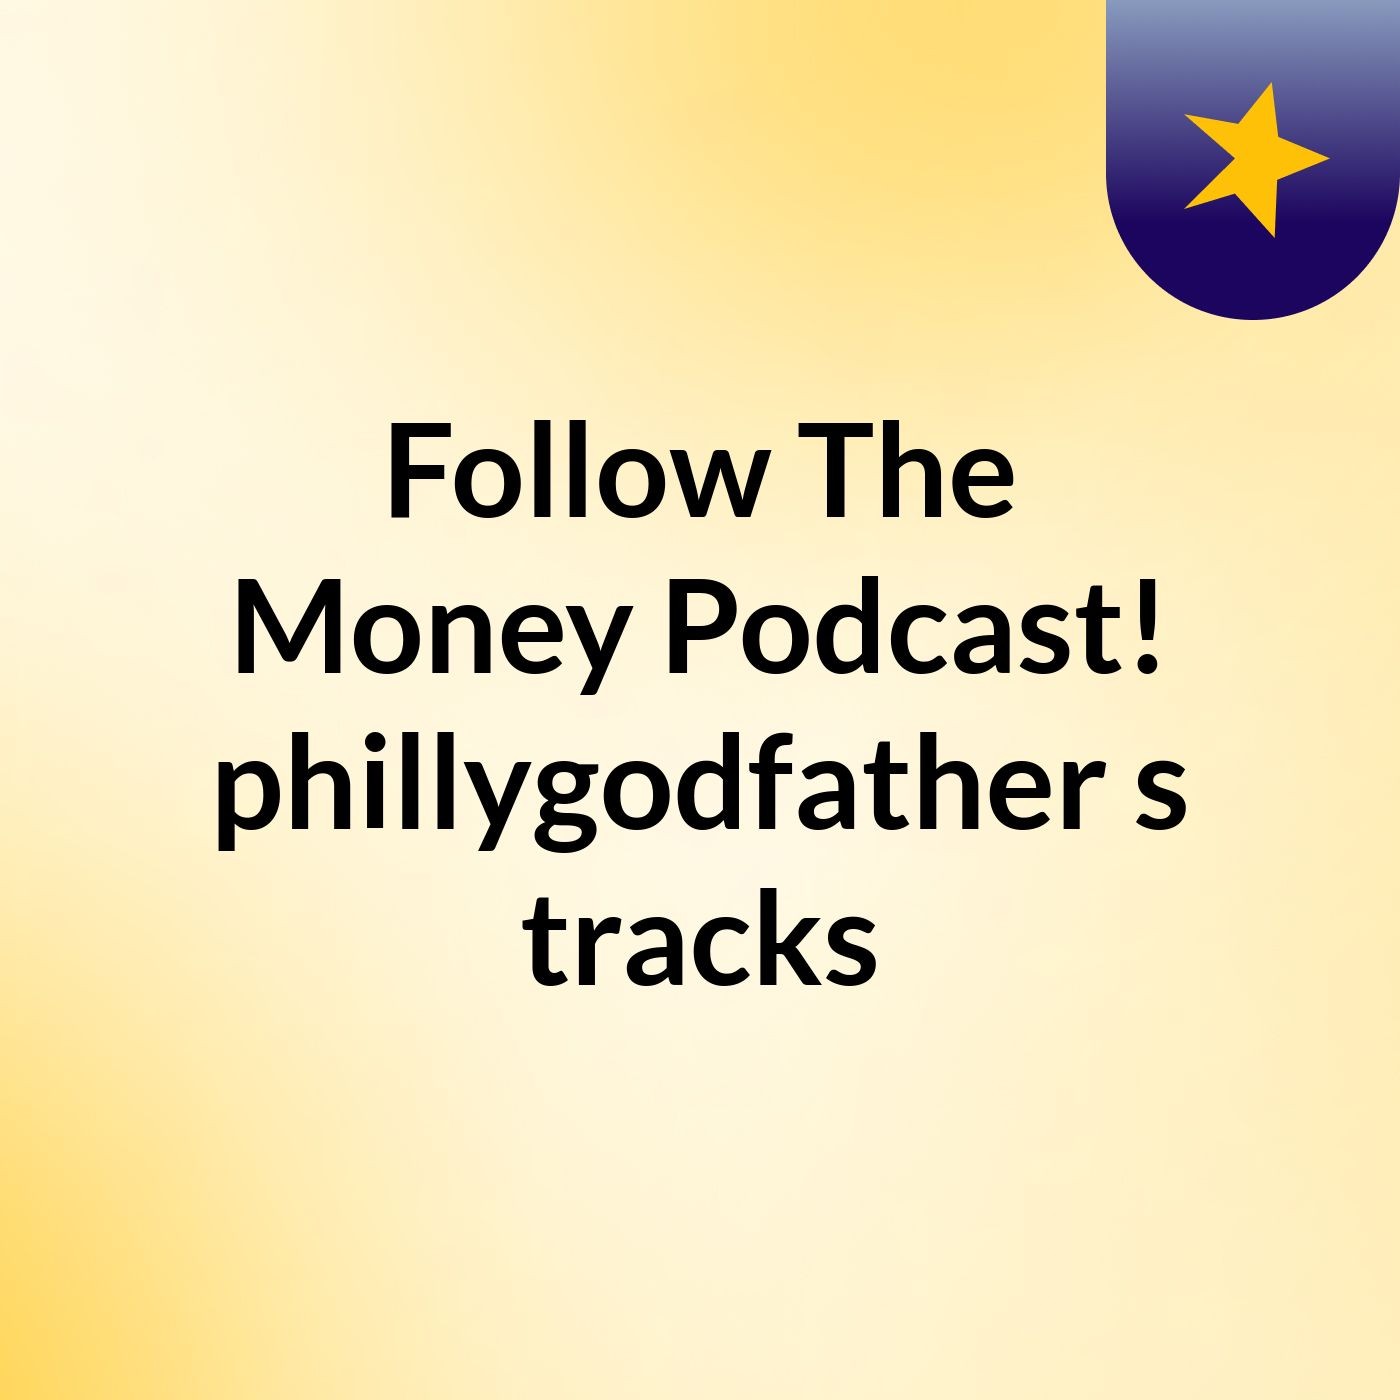 Follow The Money Podcast! phillygodfather's tracks